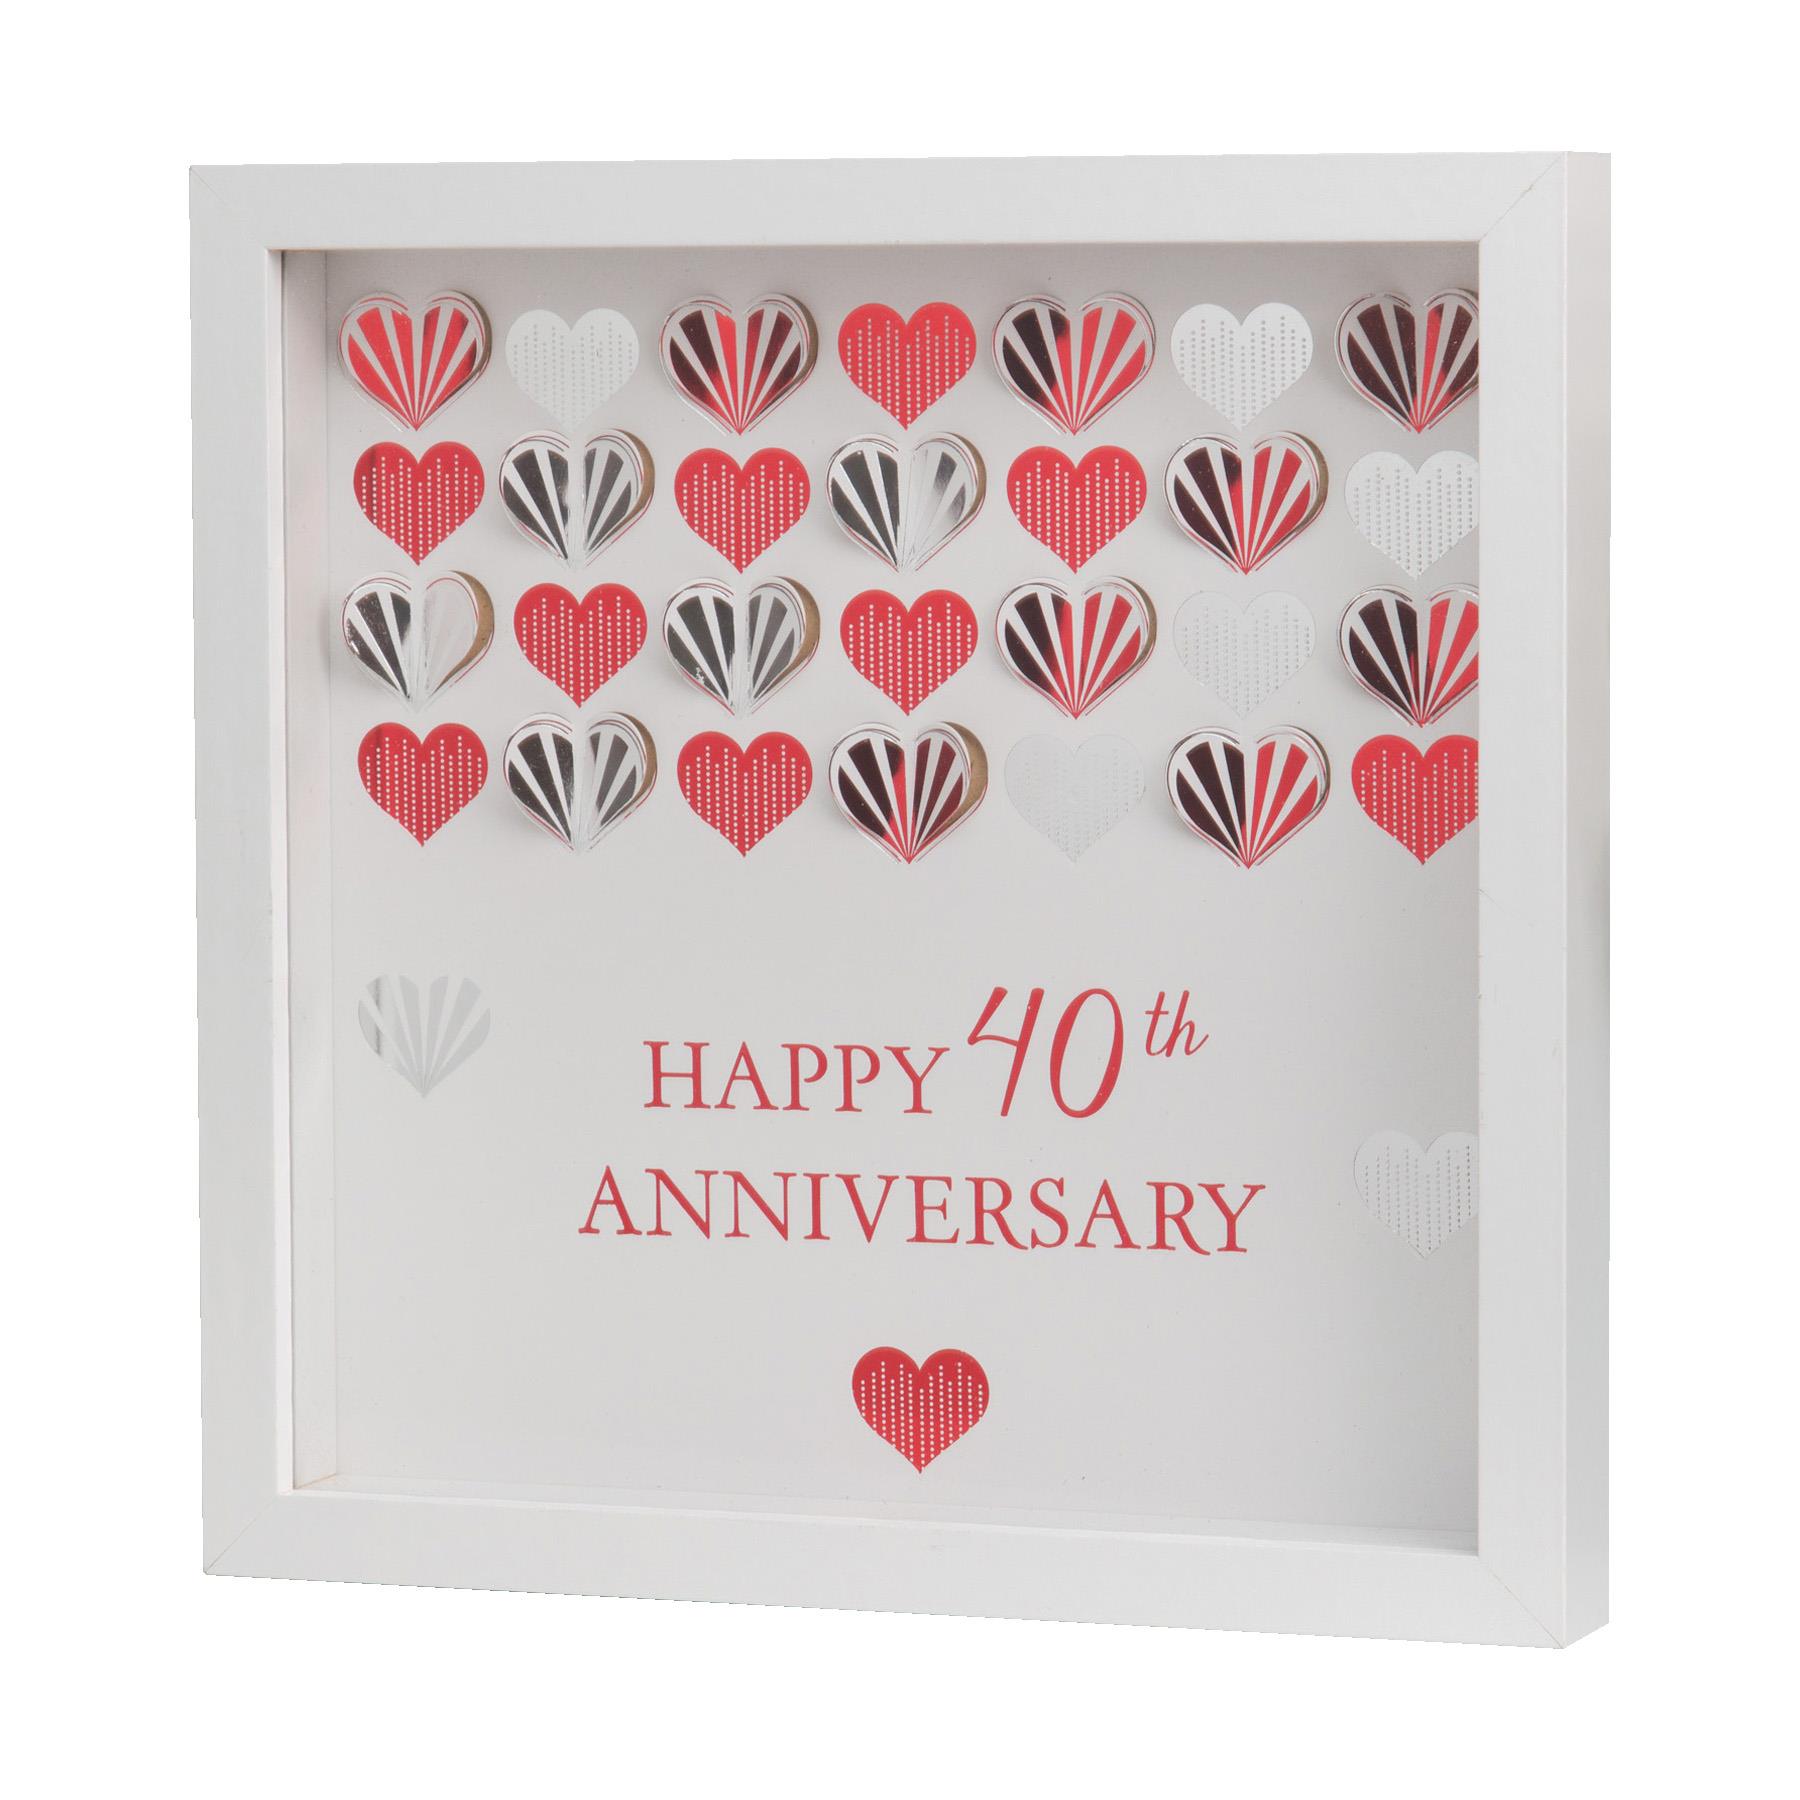 Celebrations White MDF Framed Wall Plaque - 40th Ruby Anniversary